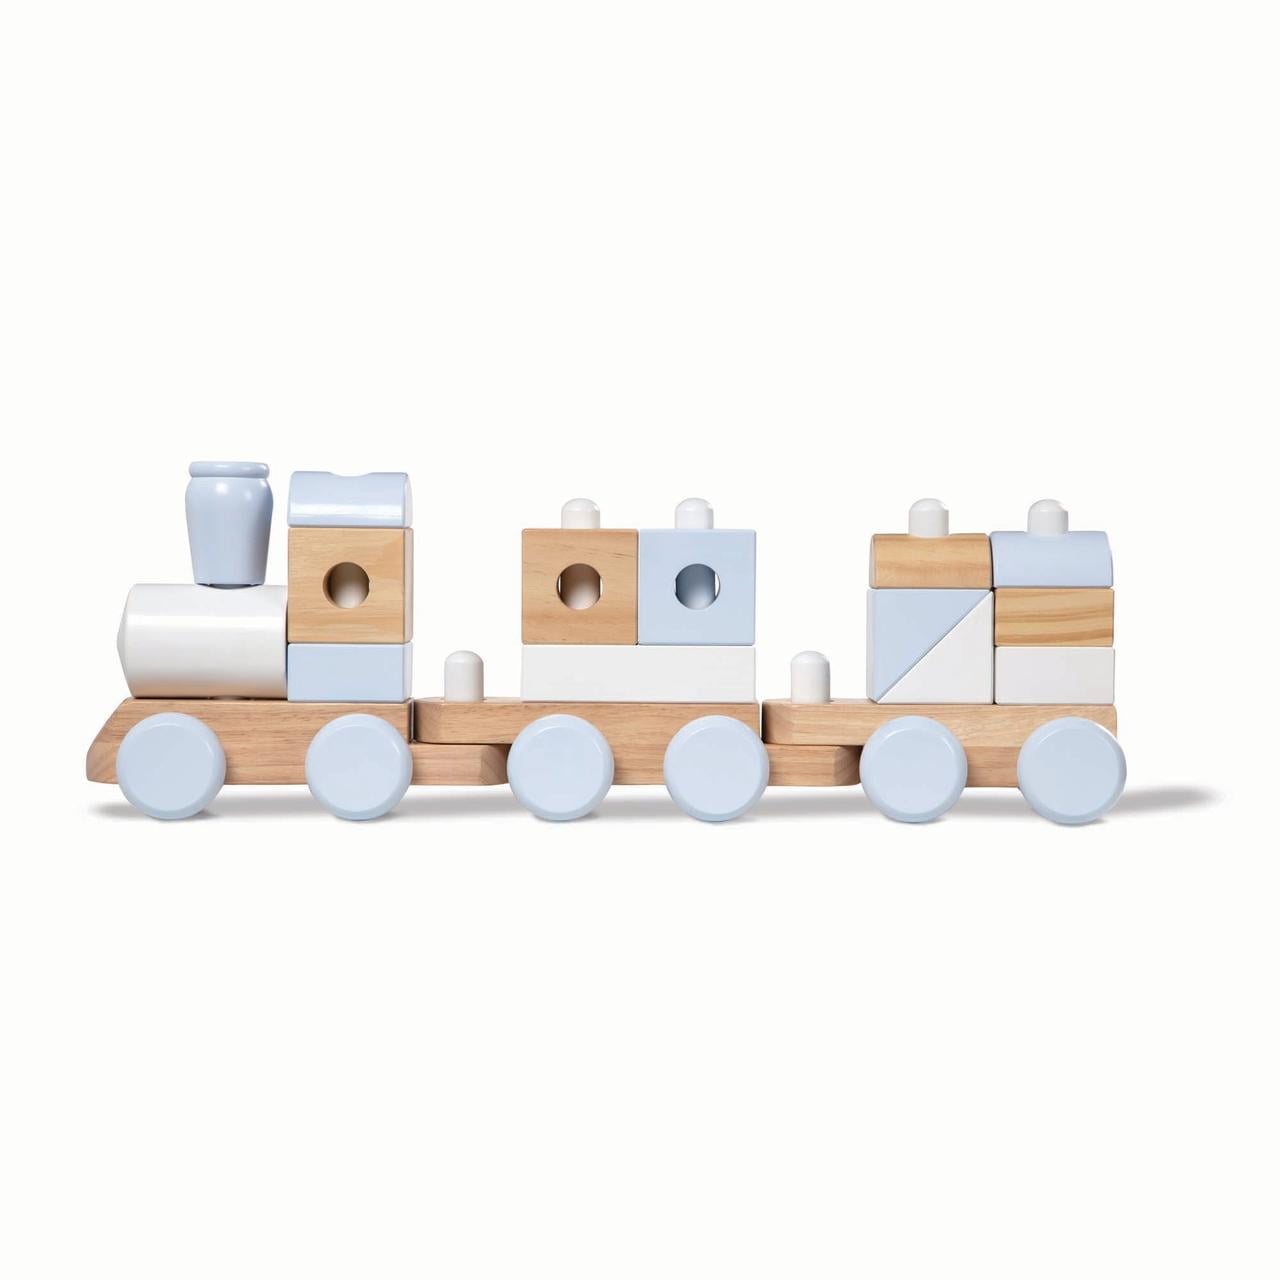 NEW Melissa & Doug Classic Toy 18 Piece Wood Stacking Train 